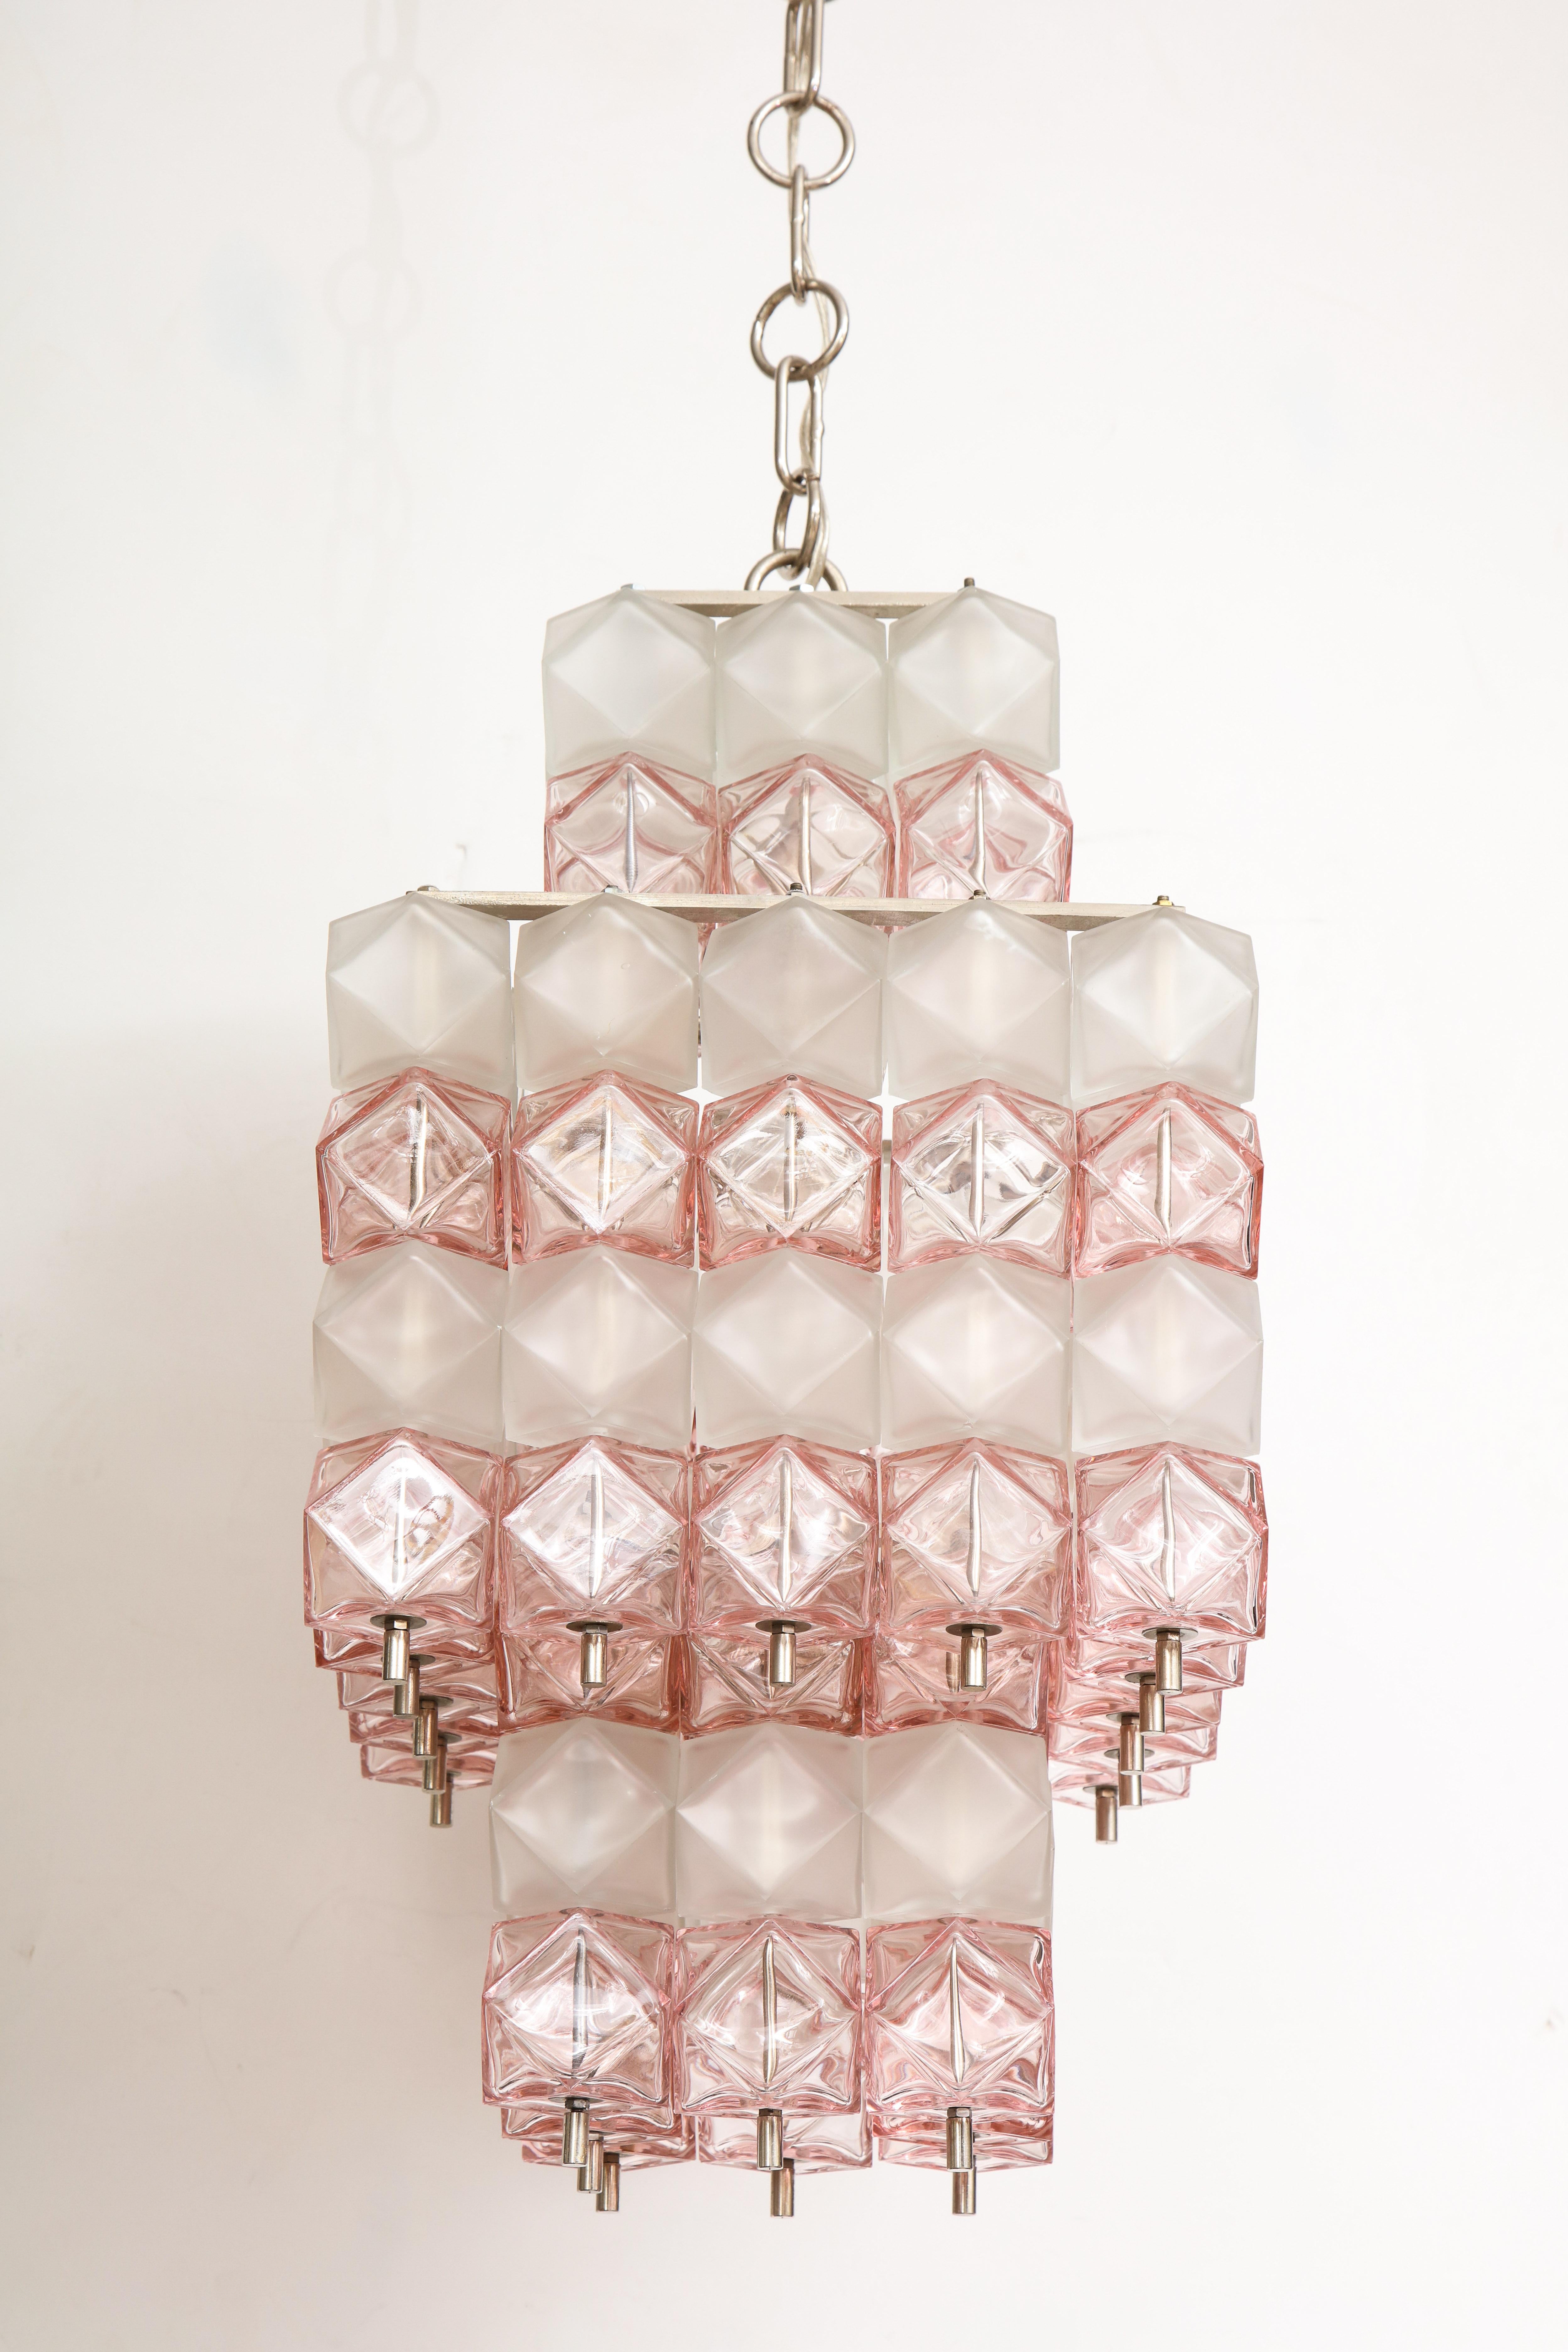 Mid-Century Murano glass chandelier composed of translucent blush pink and frosted white glass polyhedral elements suspended on matte steel frame. Rewired for use in the USA. Uses candelabra type bulbs.